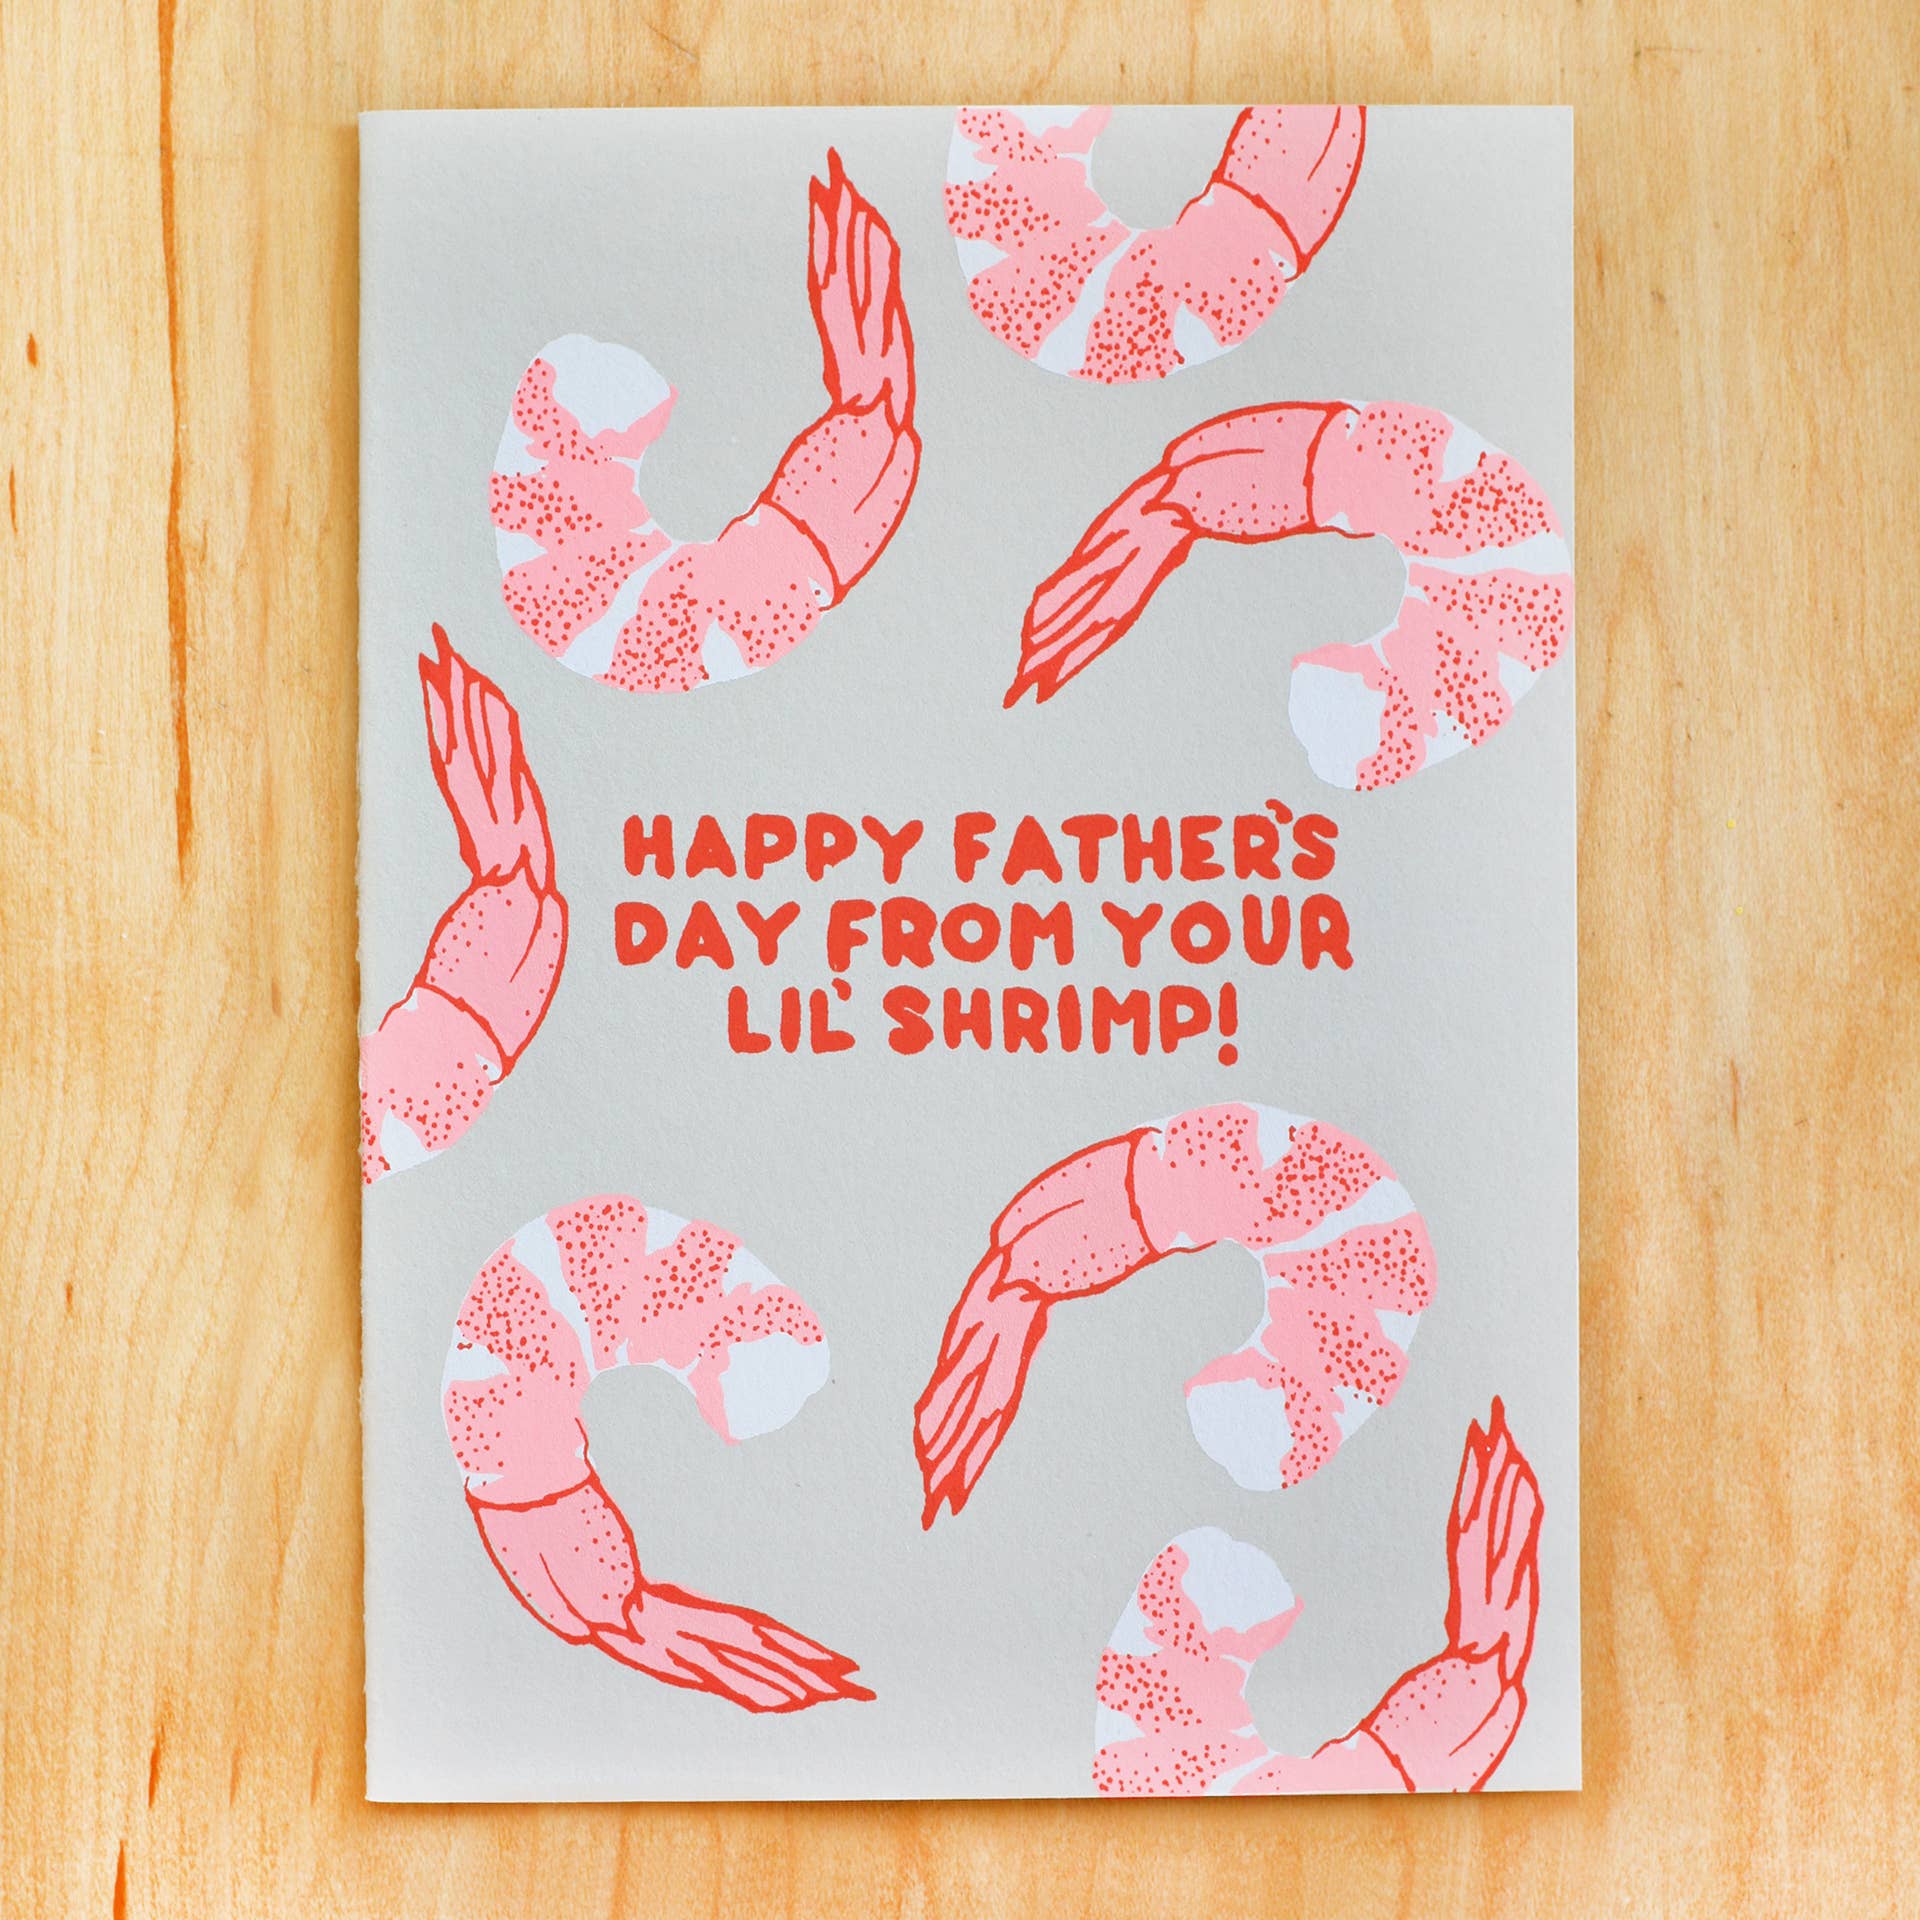 Father's Day card that reads "Happy Father's Day from your lil' shrimp!" and has shrimp all over it